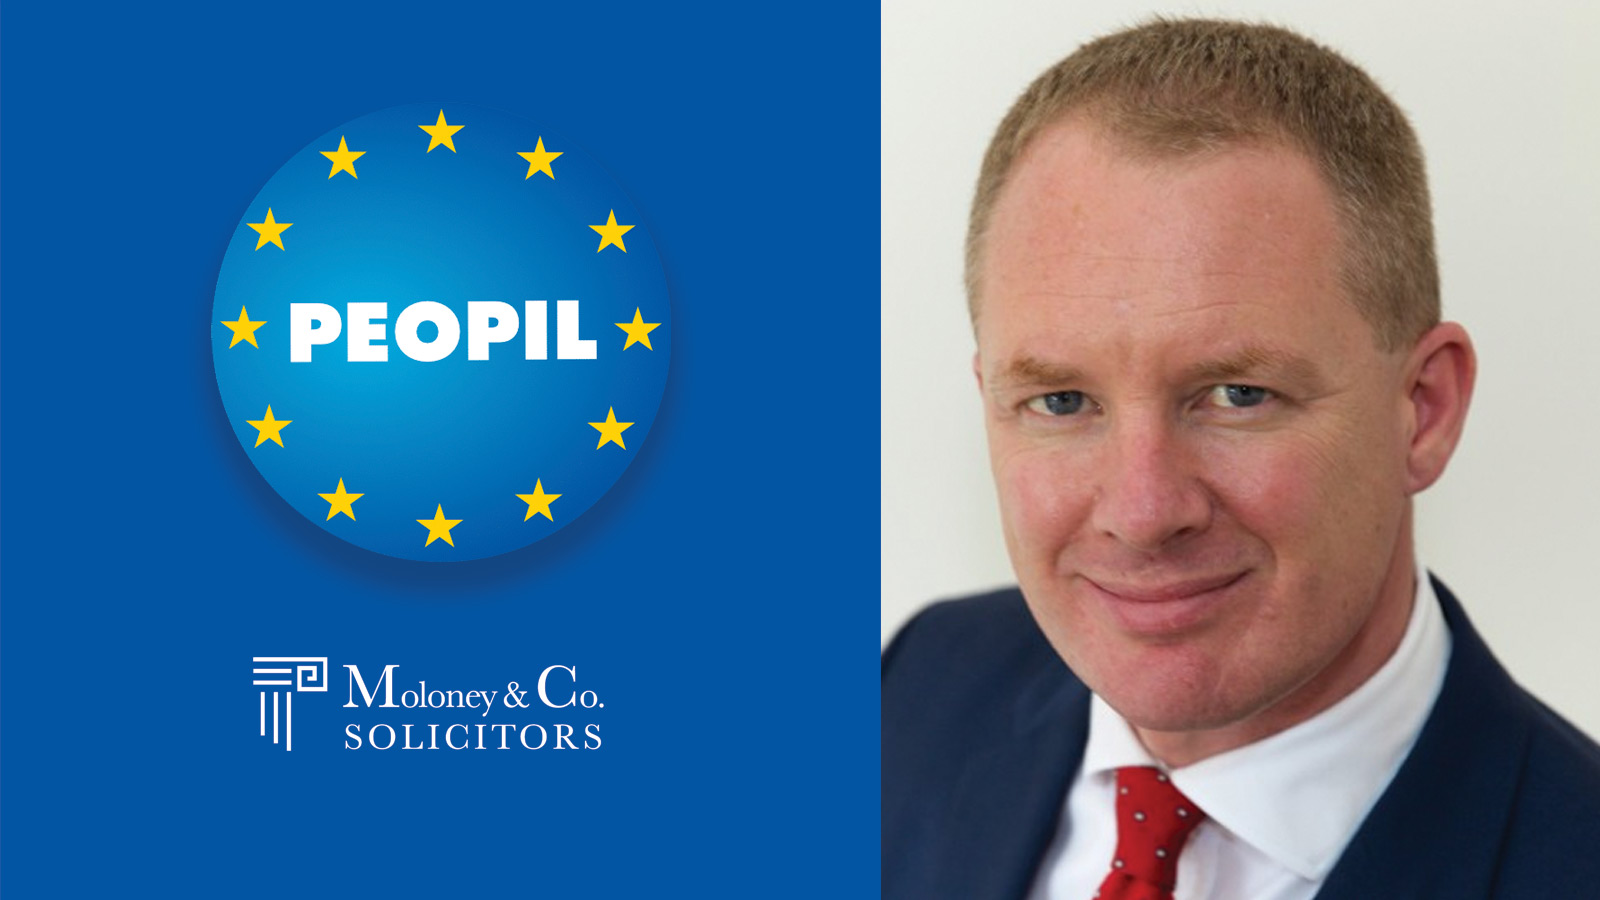 Liam Moloney Elected PEOPIL Vice-President | www.moloneysolicitors.ie